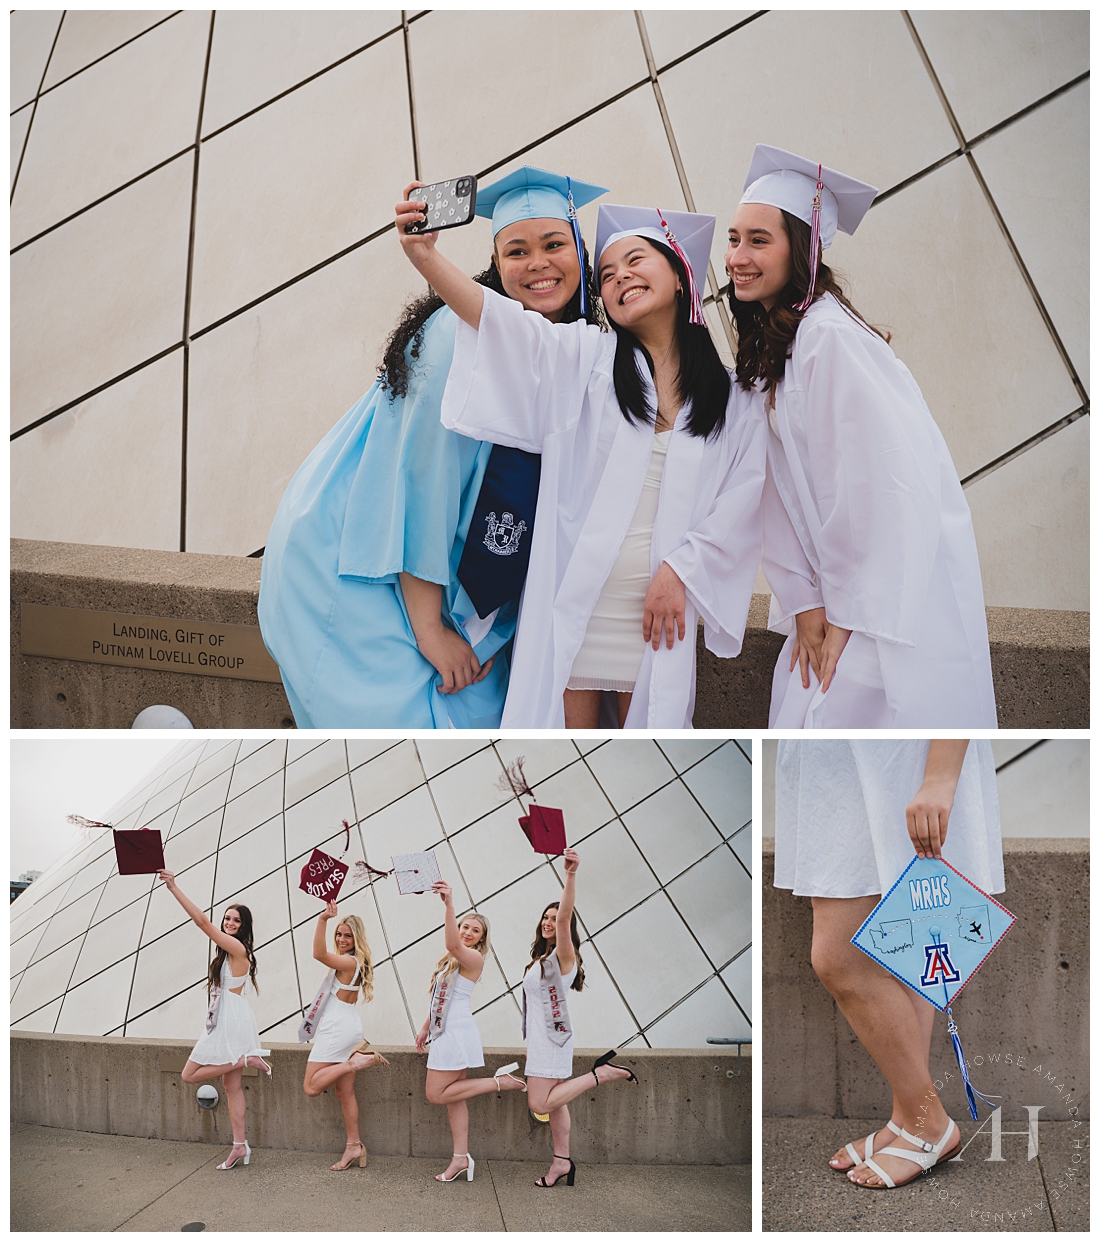 Modern Senior Cap and Gown Photos in Downtown Tacoma | Cute BFF Graduation Portraits Ideas to Celebrate Your Senior Year | Photographed by the Best Tacoma Senior Photographer Amanda Howse